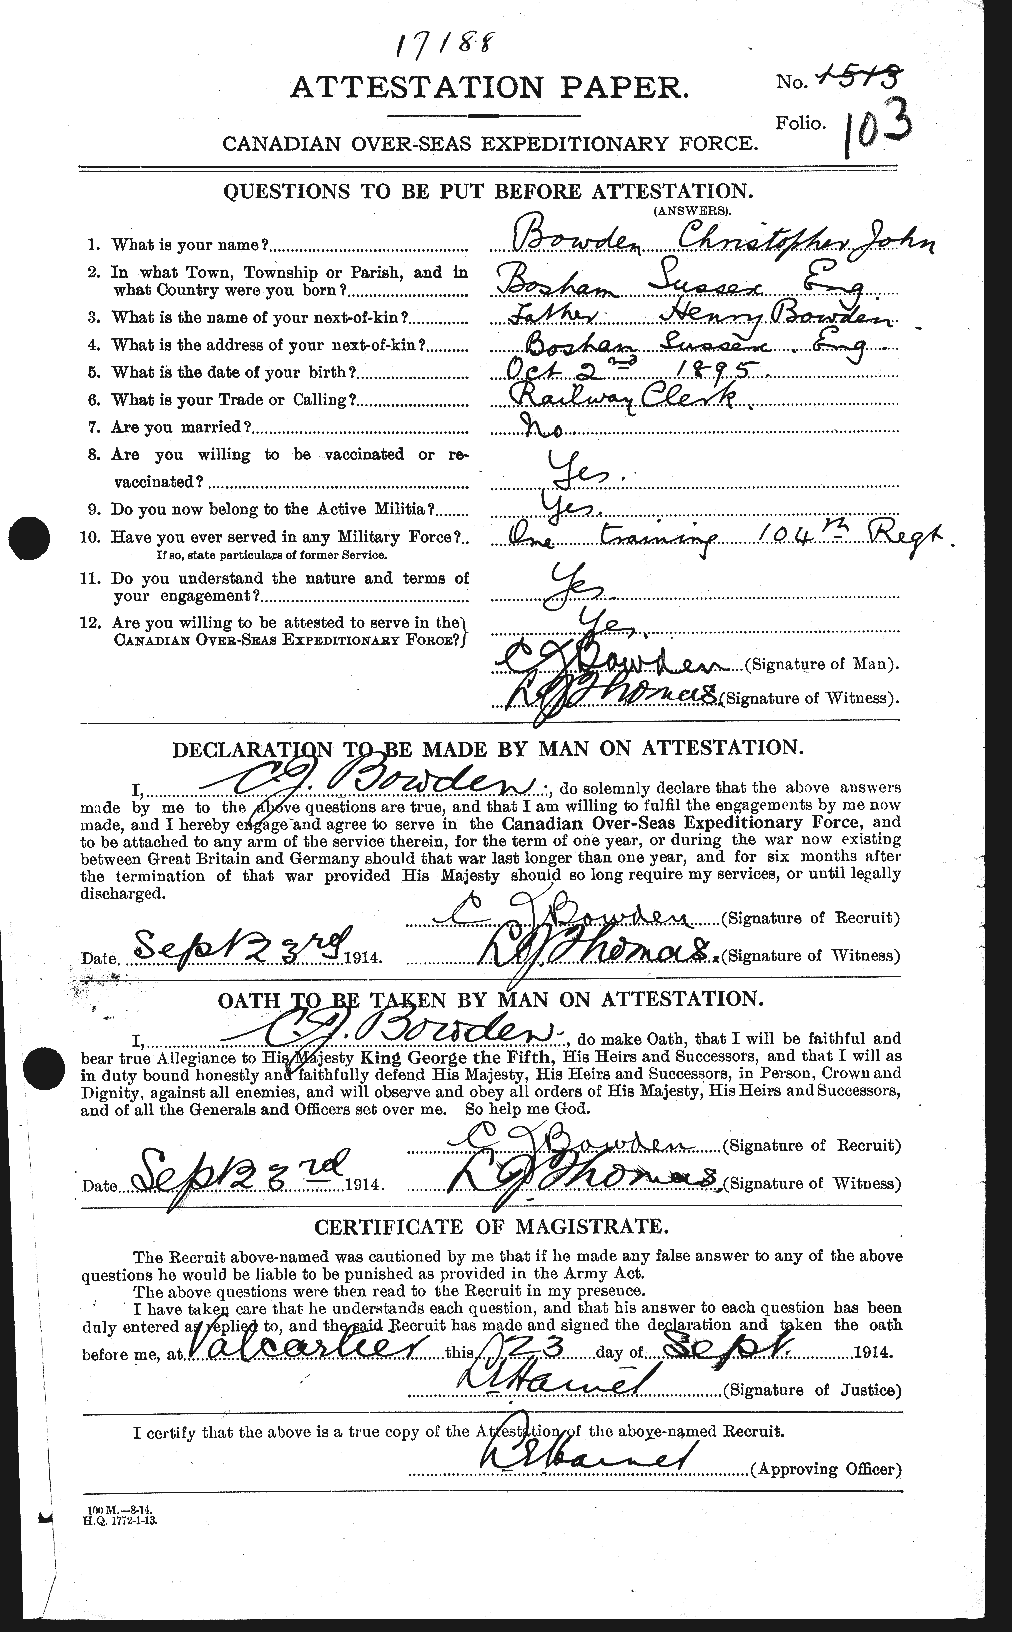 Personnel Records of the First World War - CEF 254549a